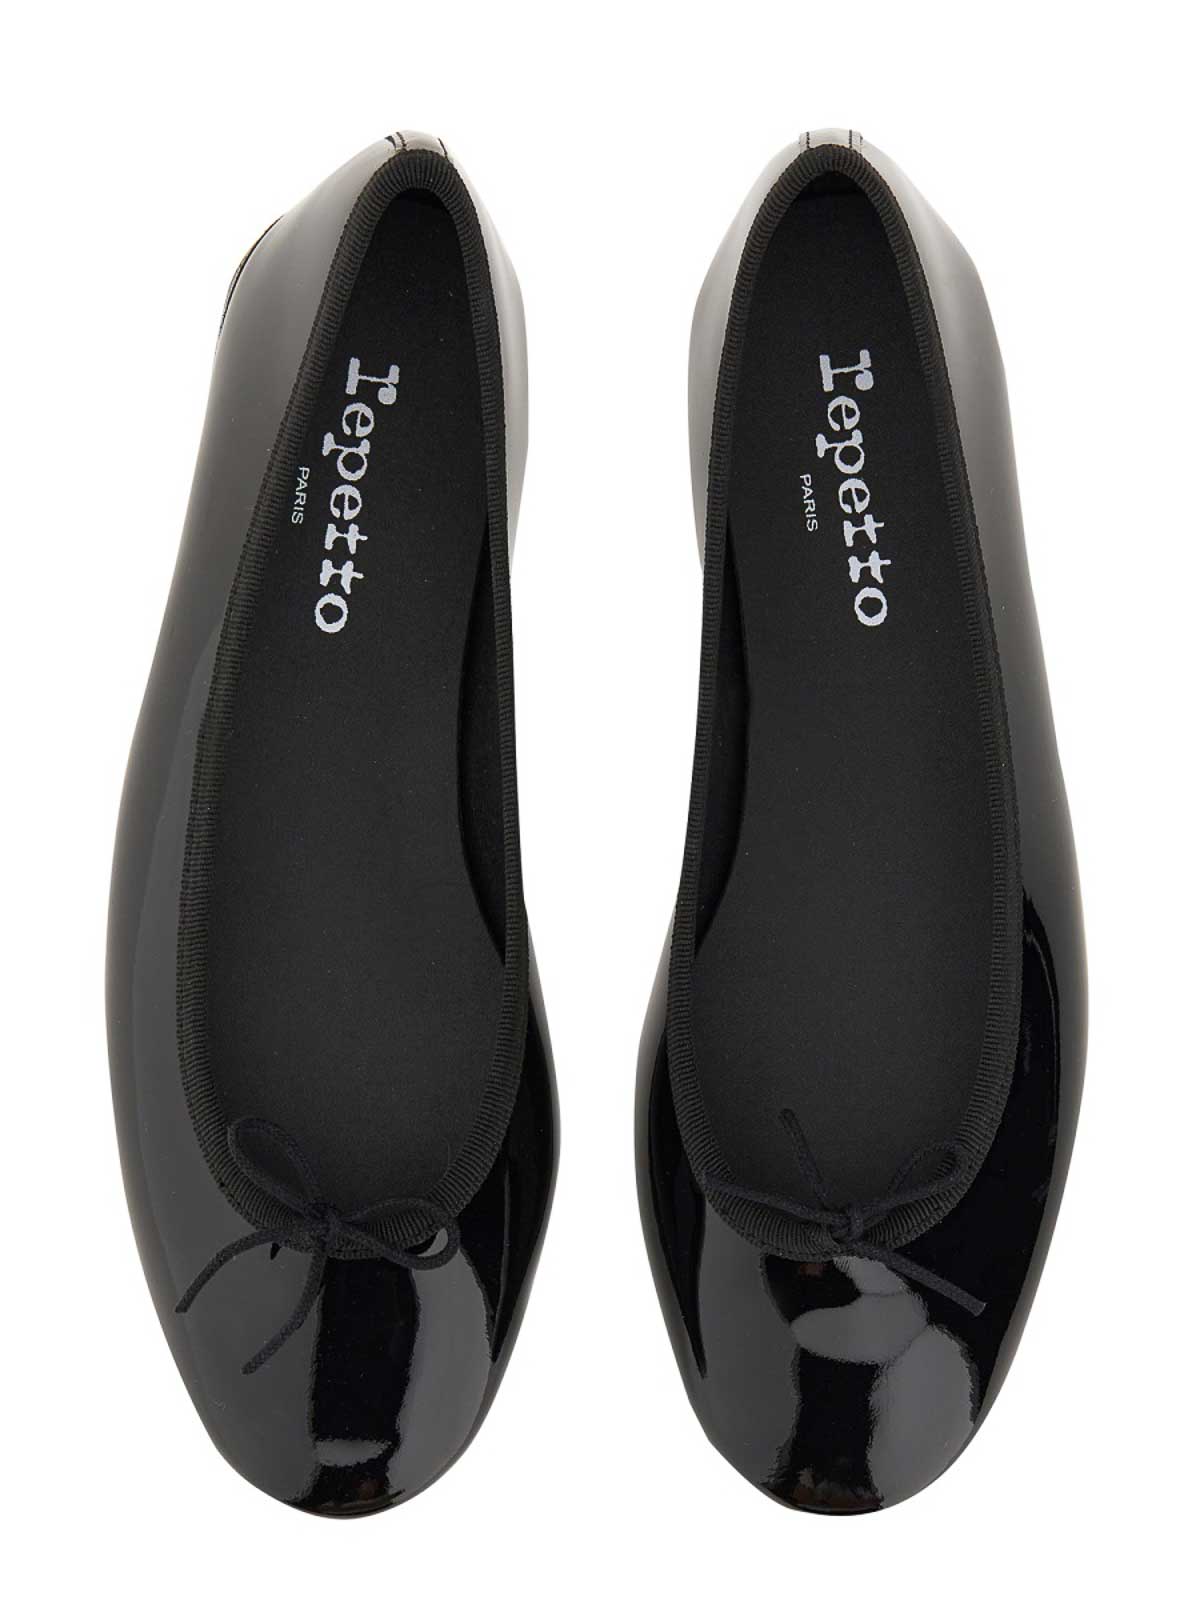 Shop Repetto Flat Shoes Lili In Black